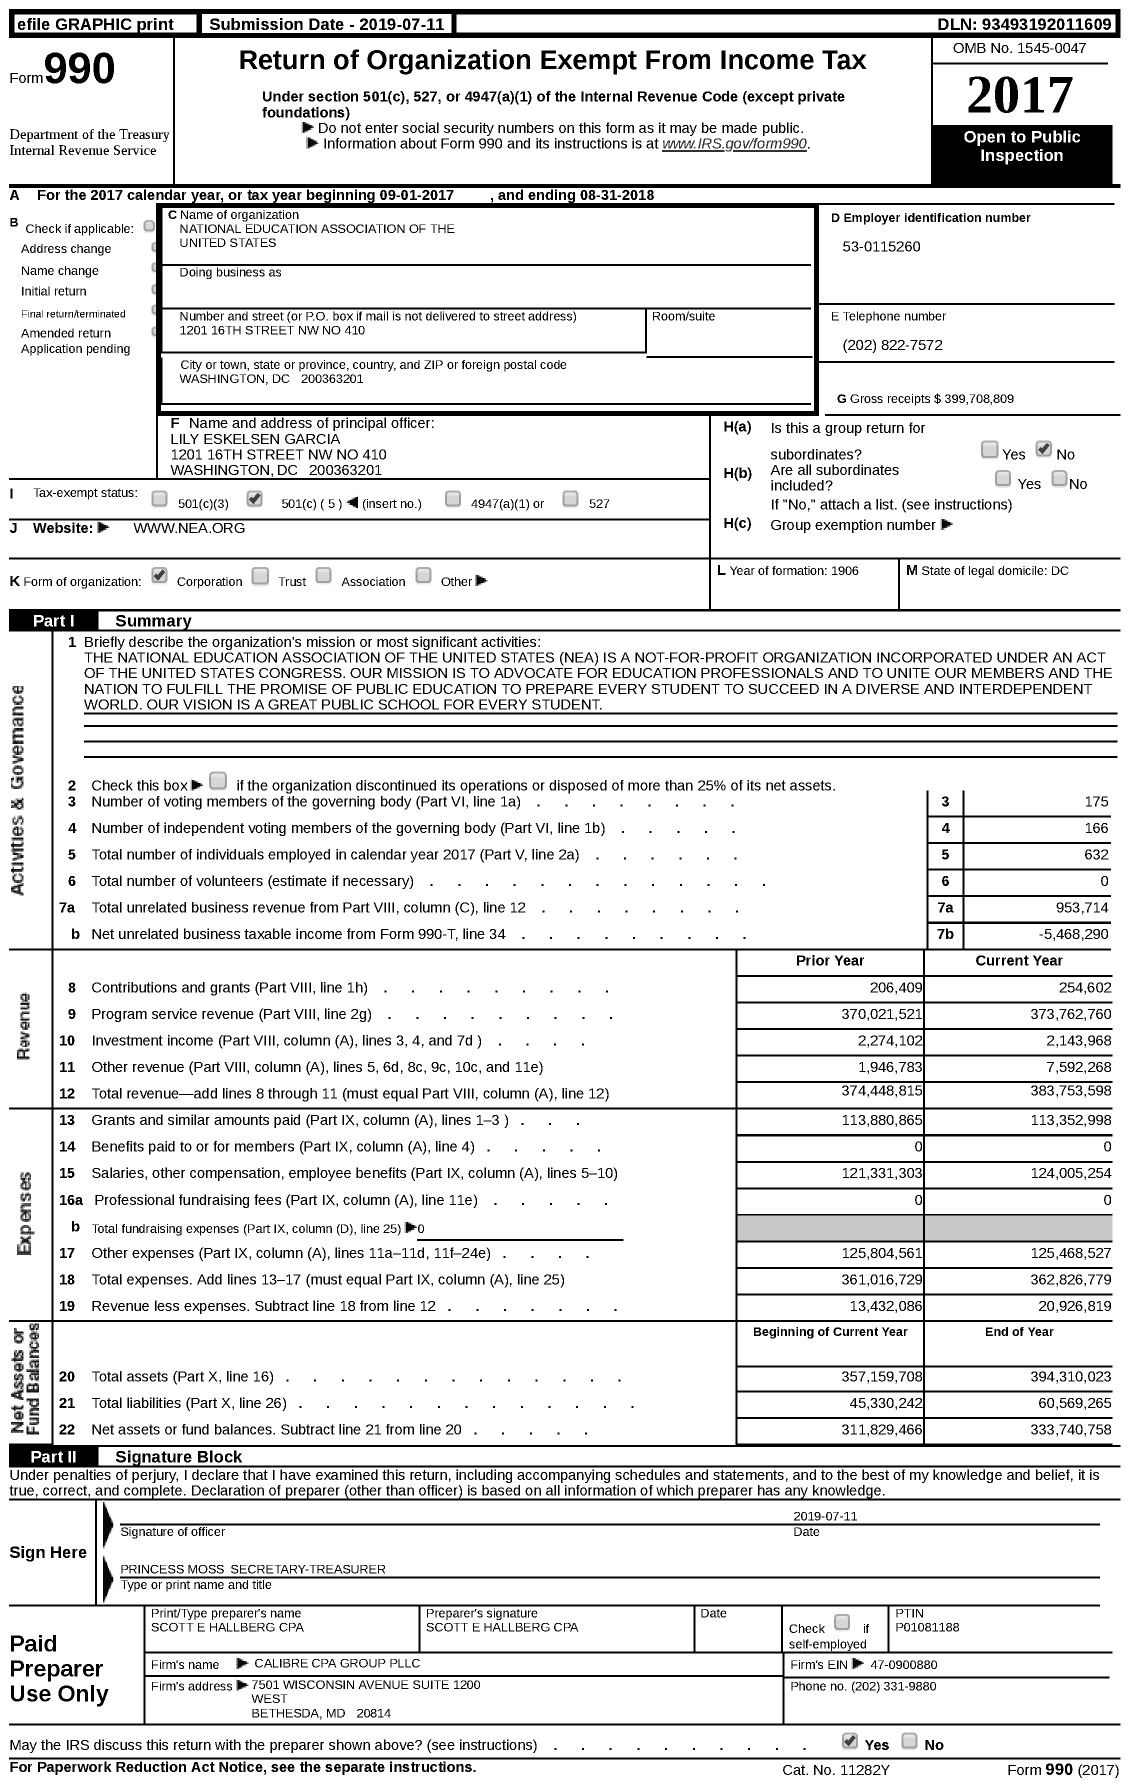 Image of first page of 2017 Form 990 for National Education Association of the United States